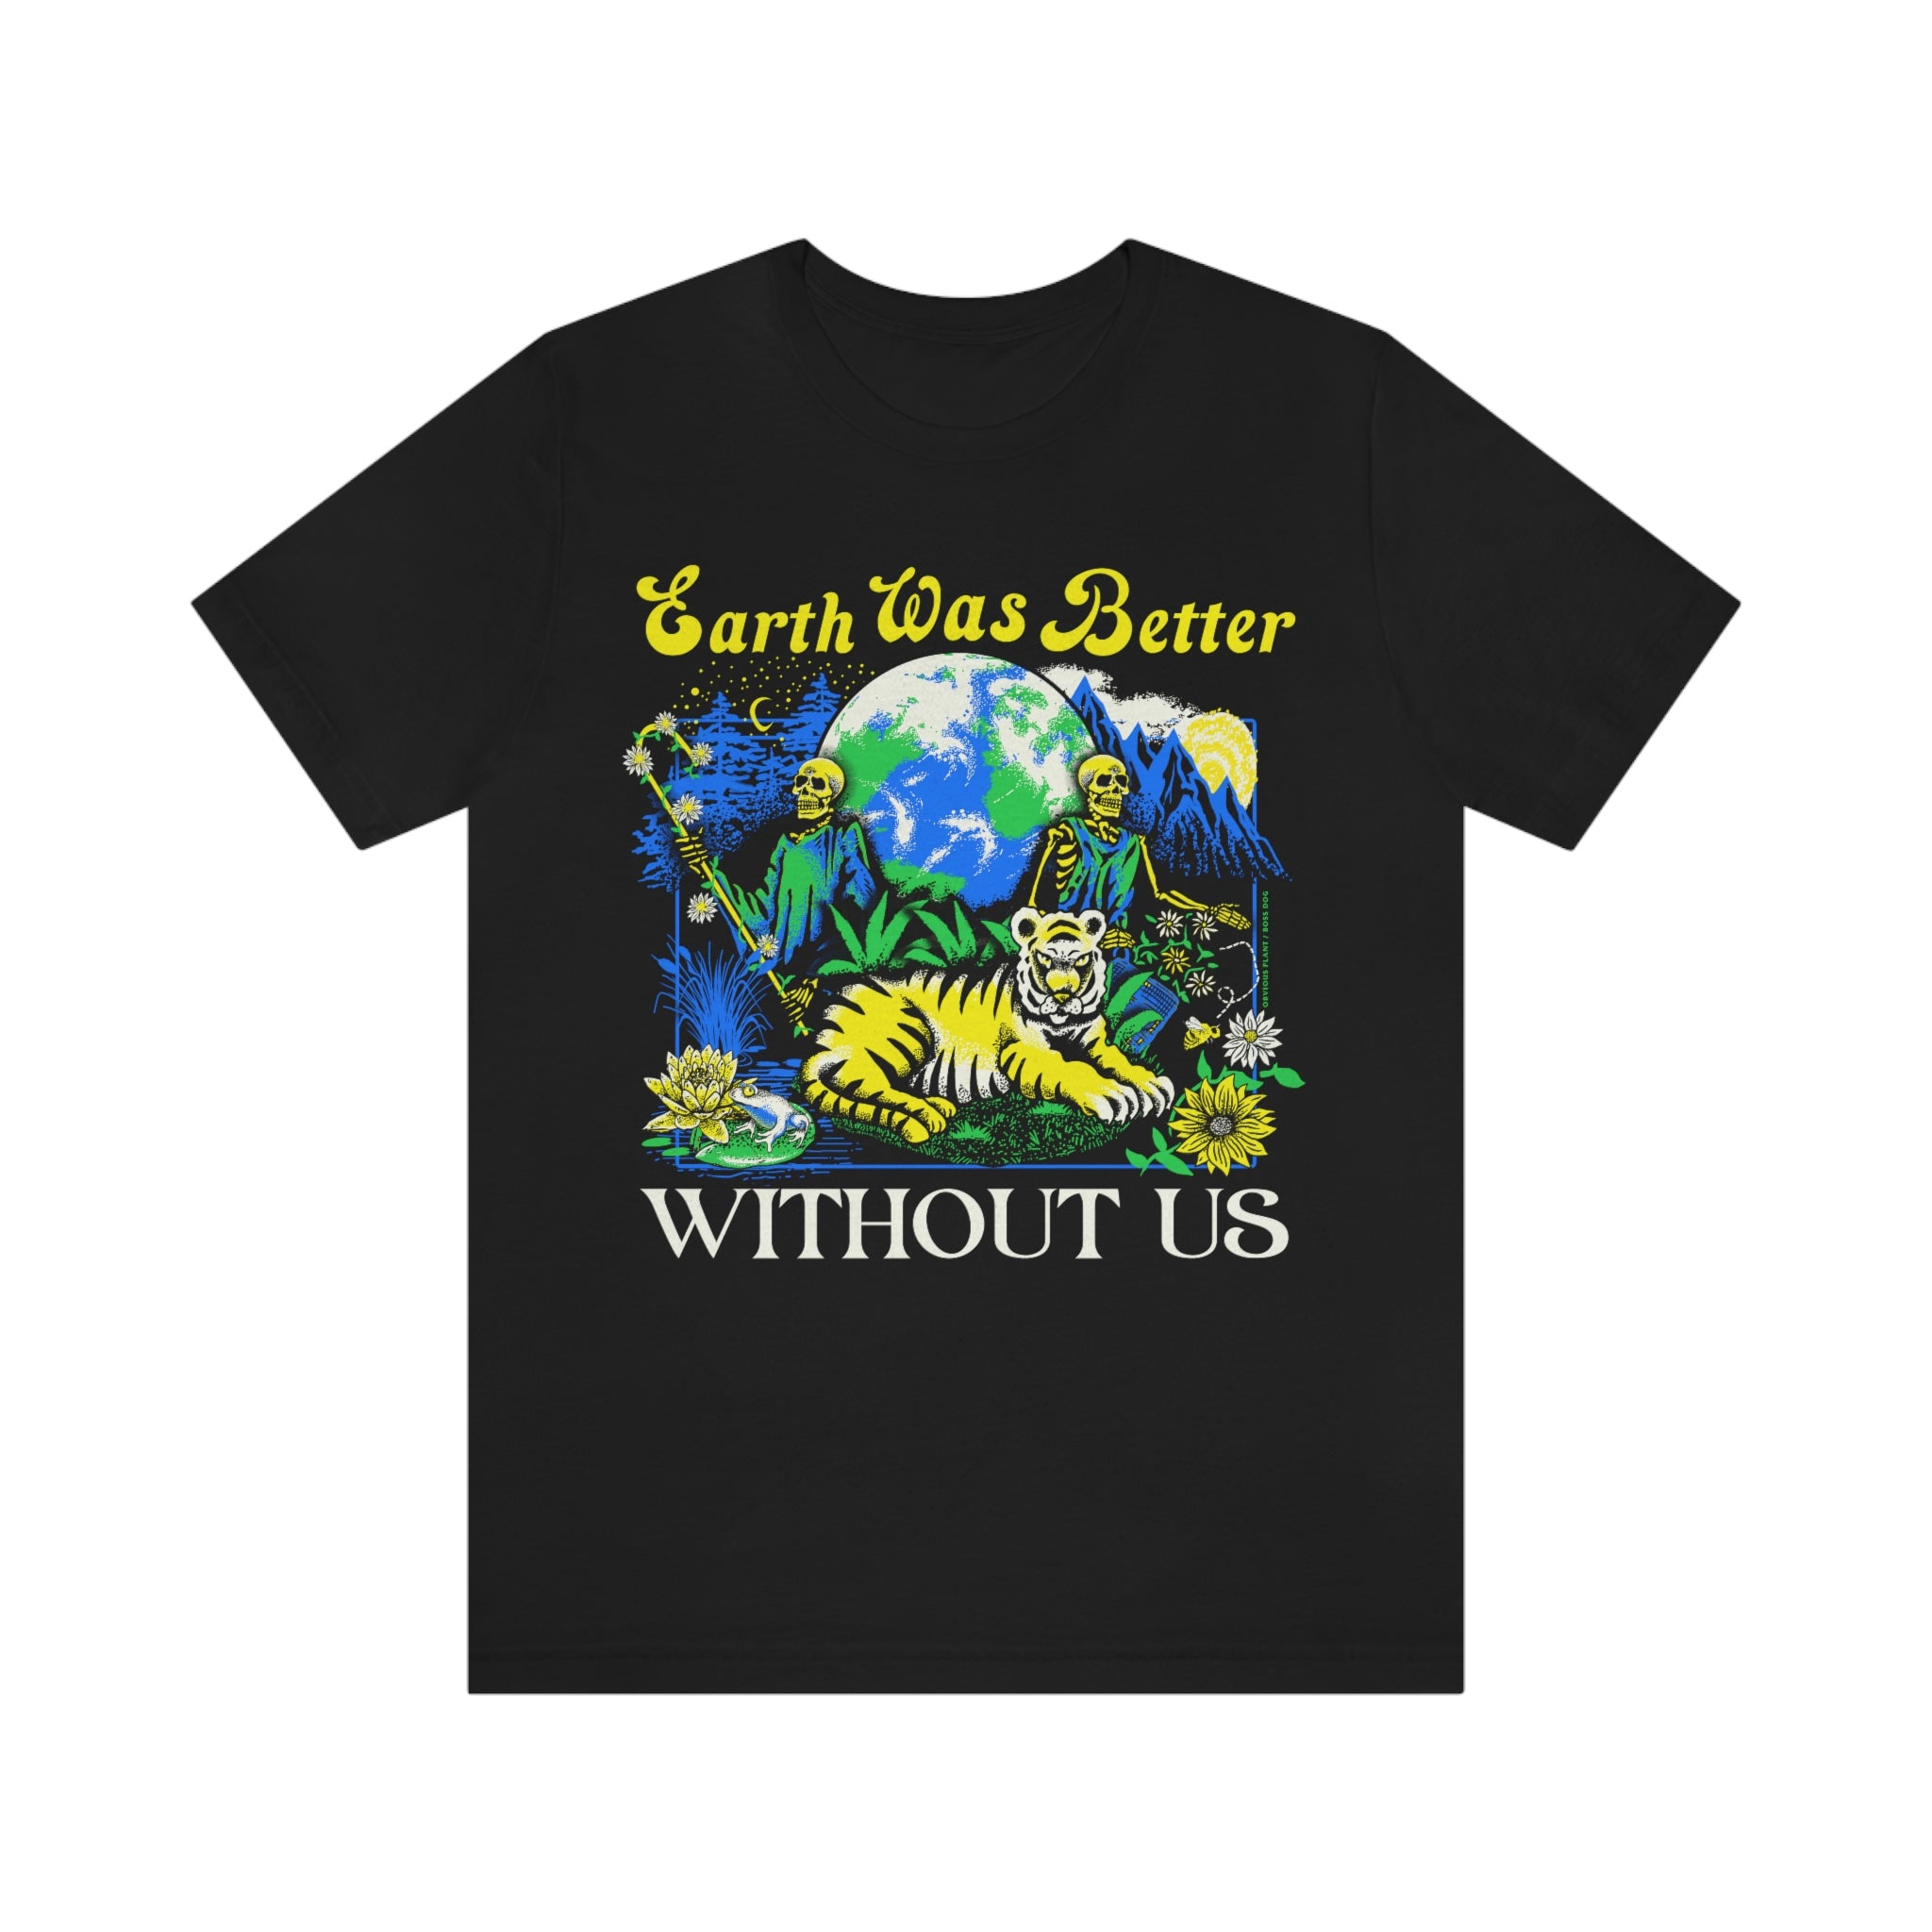 Earth Was Better Without Us Shirt